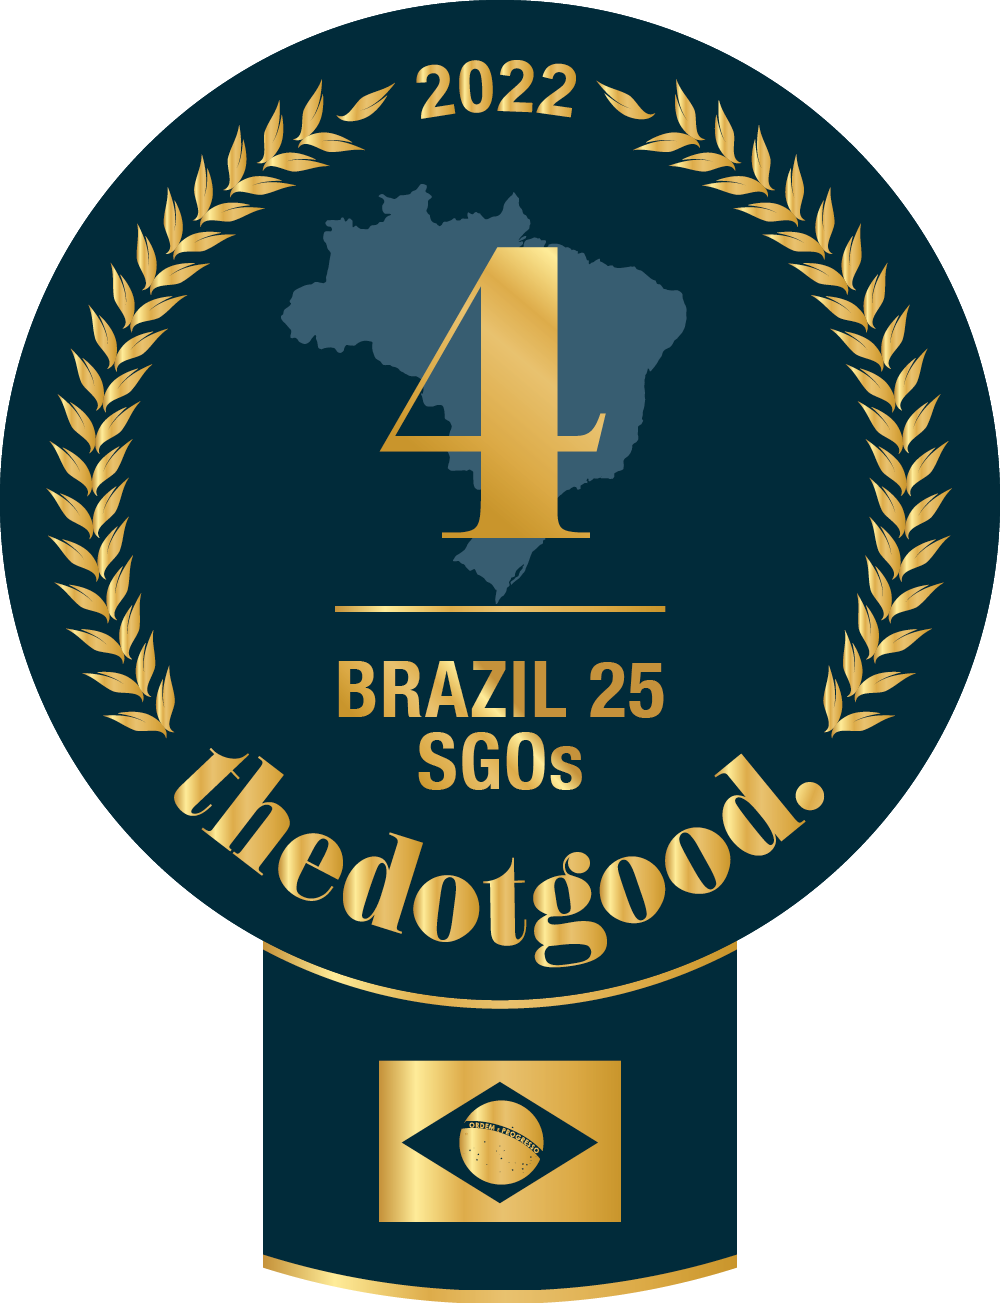 INSTITUTO DA CRIANCA is brazil ranked on thedotgood.